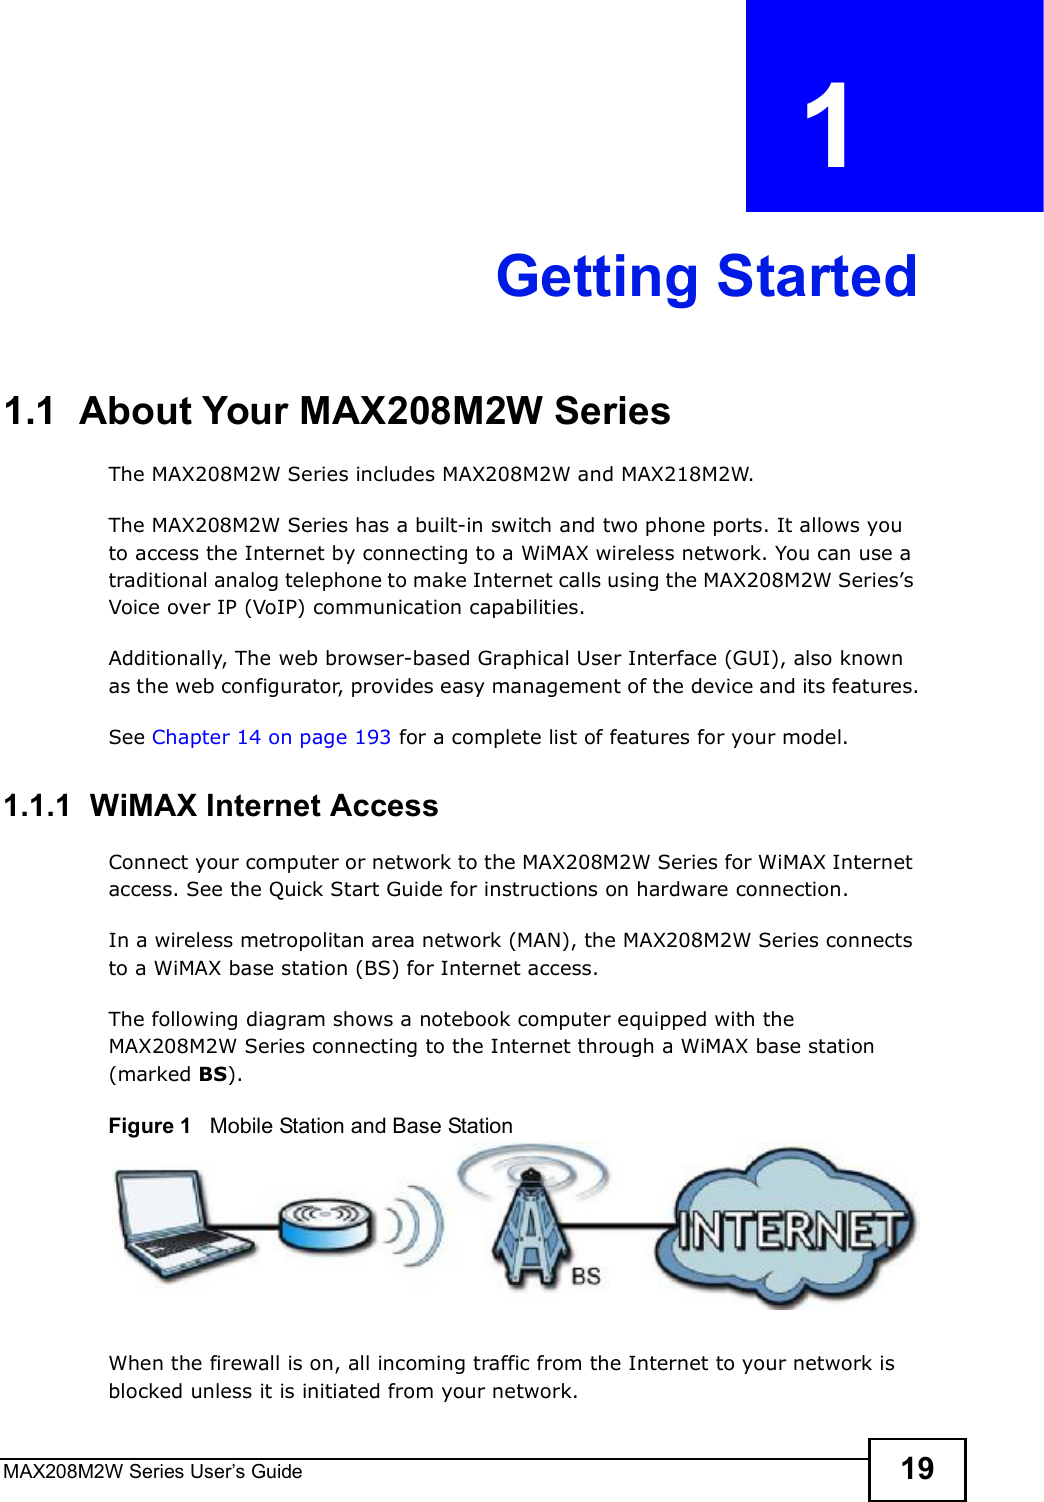 MAX208M2W Series User s Guide 19CHAPTER  1 Getting Started1.1  About Your MAX208M2W Series The MAX208M2W Series includes MAX208M2W and MAX218M2W.The MAX208M2W Series has a built-in switch and two phone ports. It allows you to access the Internet by connecting to a WiMAX wireless network. You can use a traditional analog telephone to make Internet calls using the MAX208M2W Series s Voice over IP (VoIP) communication capabilities. Additionally, The web browser-based Graphical User Interface (GUI), also known as the web configurator, provides easy management of the device and its features.See Chapter 14 on page 193 for a complete list of features for your model.1.1.1  WiMAX Internet AccessConnect your computer or network to the MAX208M2W Series for WiMAX Internet access. See the Quick Start Guide for instructions on hardware connection.In a wireless metropolitan area network (MAN), the MAX208M2W Series connects to a WiMAX base station (BS) for Internet access. The following diagram shows a notebook computer equipped with the MAX208M2W Series connecting to the Internet through a WiMAX base station (marked BS).Figure 1   Mobile Station and Base StationWhen the firewall is on, all incoming traffic from the Internet to your network is blocked unless it is initiated from your network. 